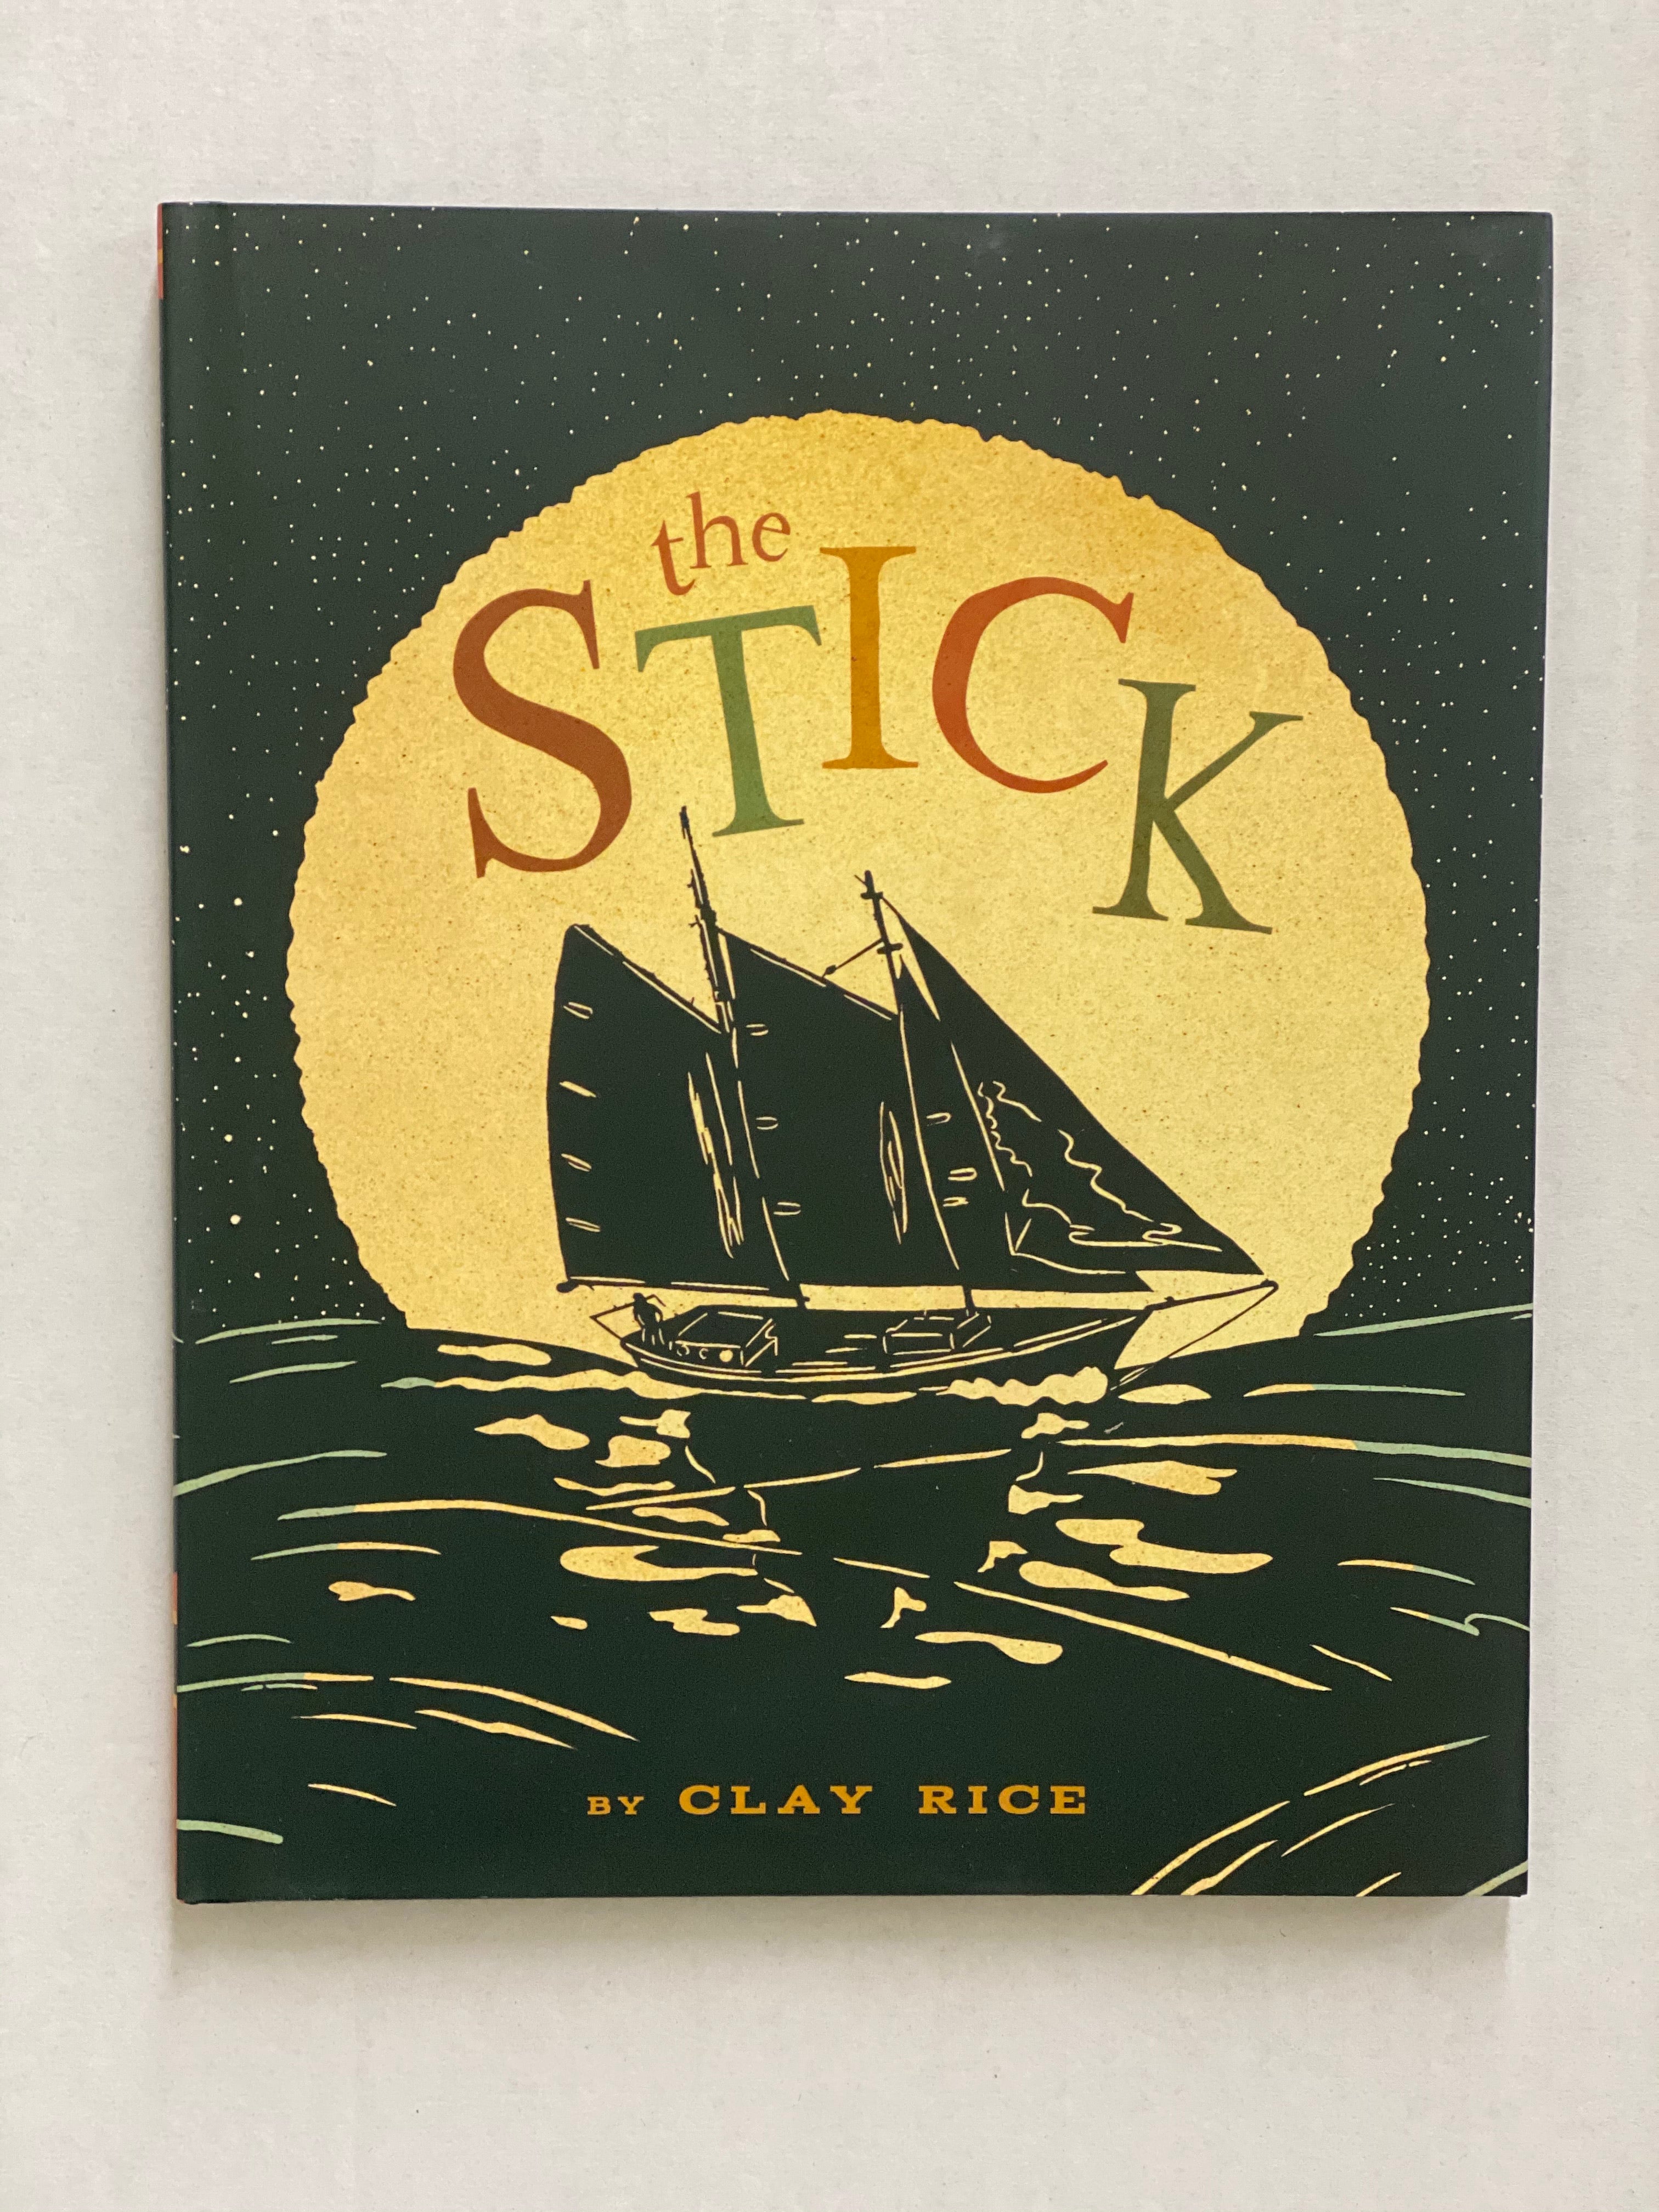 The Stick Book by Clay Rice